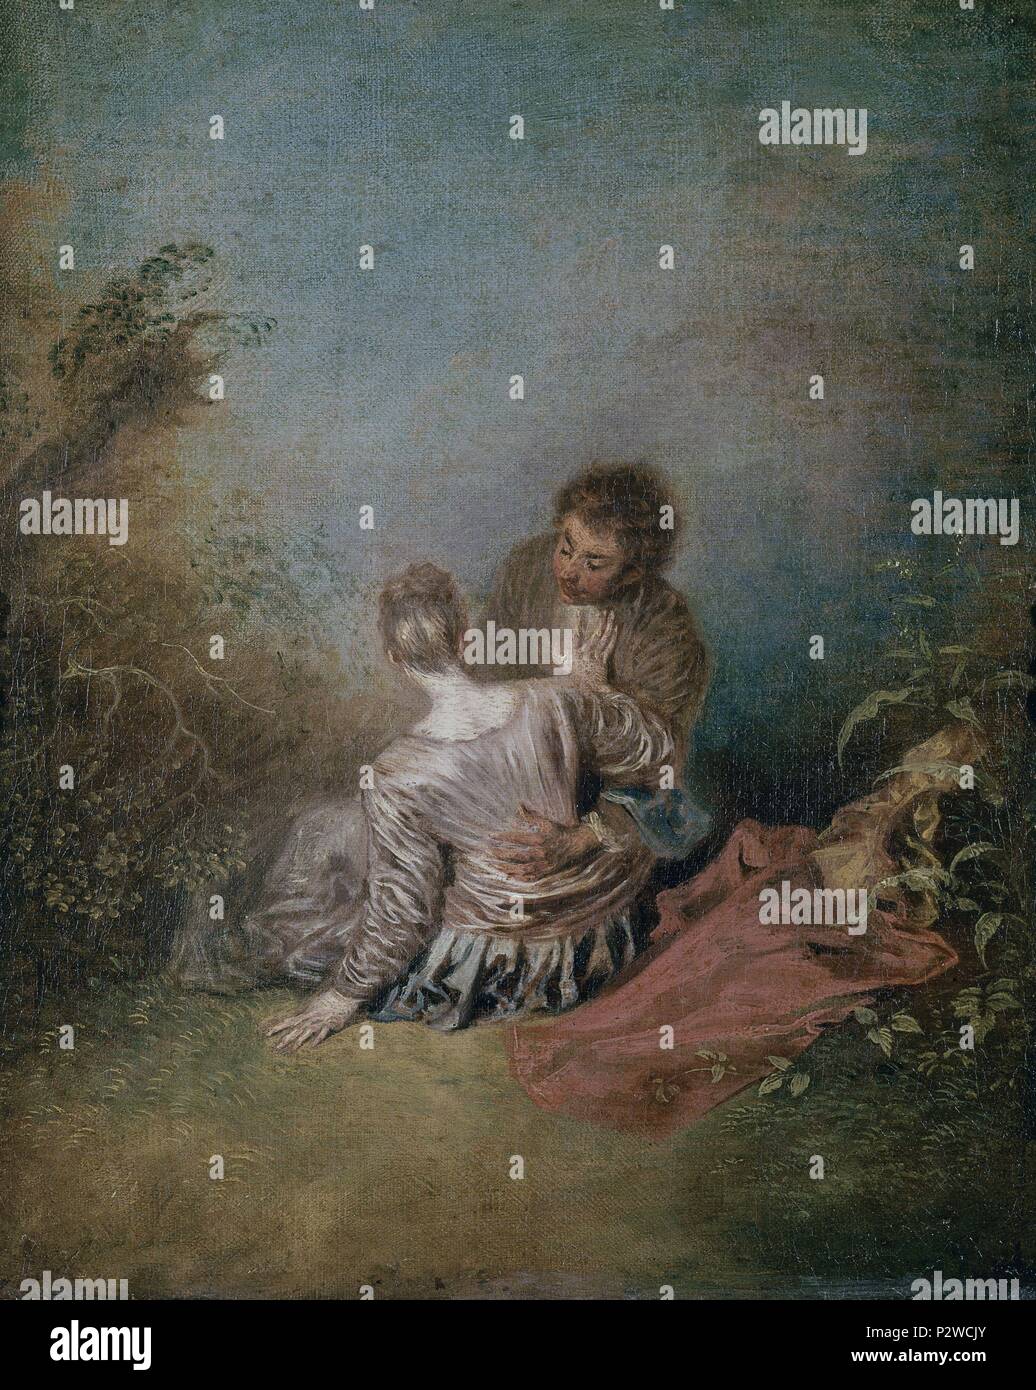 'The Misstep', ca. 1717, Oil on canvas, 40 x 31,5 cm. Author: Jean Antoine Watteau (1684-1721). Location: LOUVRE MUSEUM-PAINTINGS, FRANCE. Also known as: EL PASO EN FALSO. Stock Photo